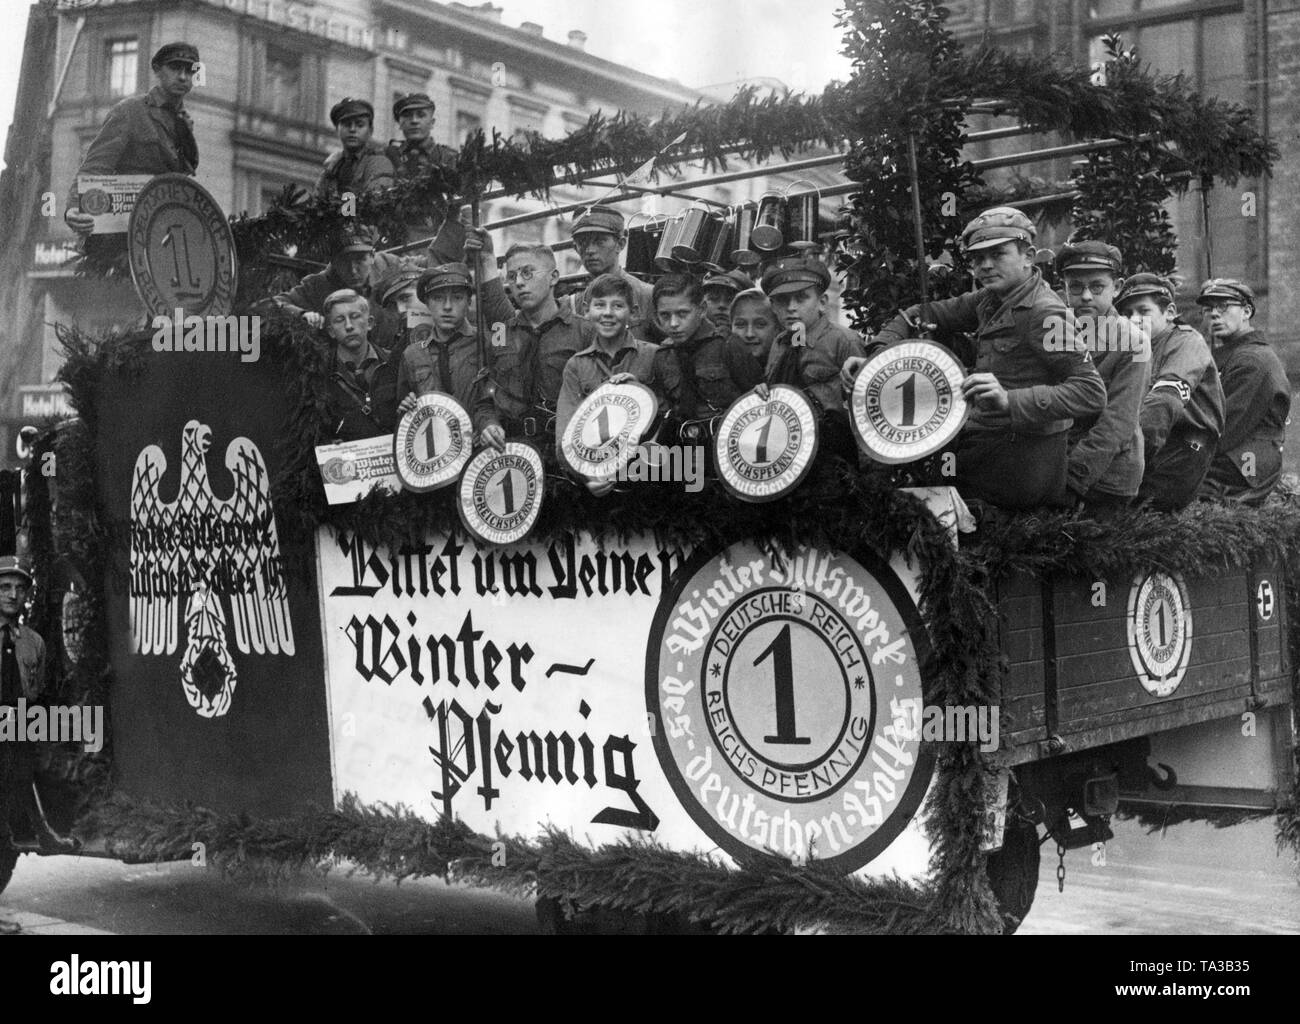 Members of the HJ on a decorated vehicle for the collection of the so-called Winterpfennig for the WHW. Stock Photo